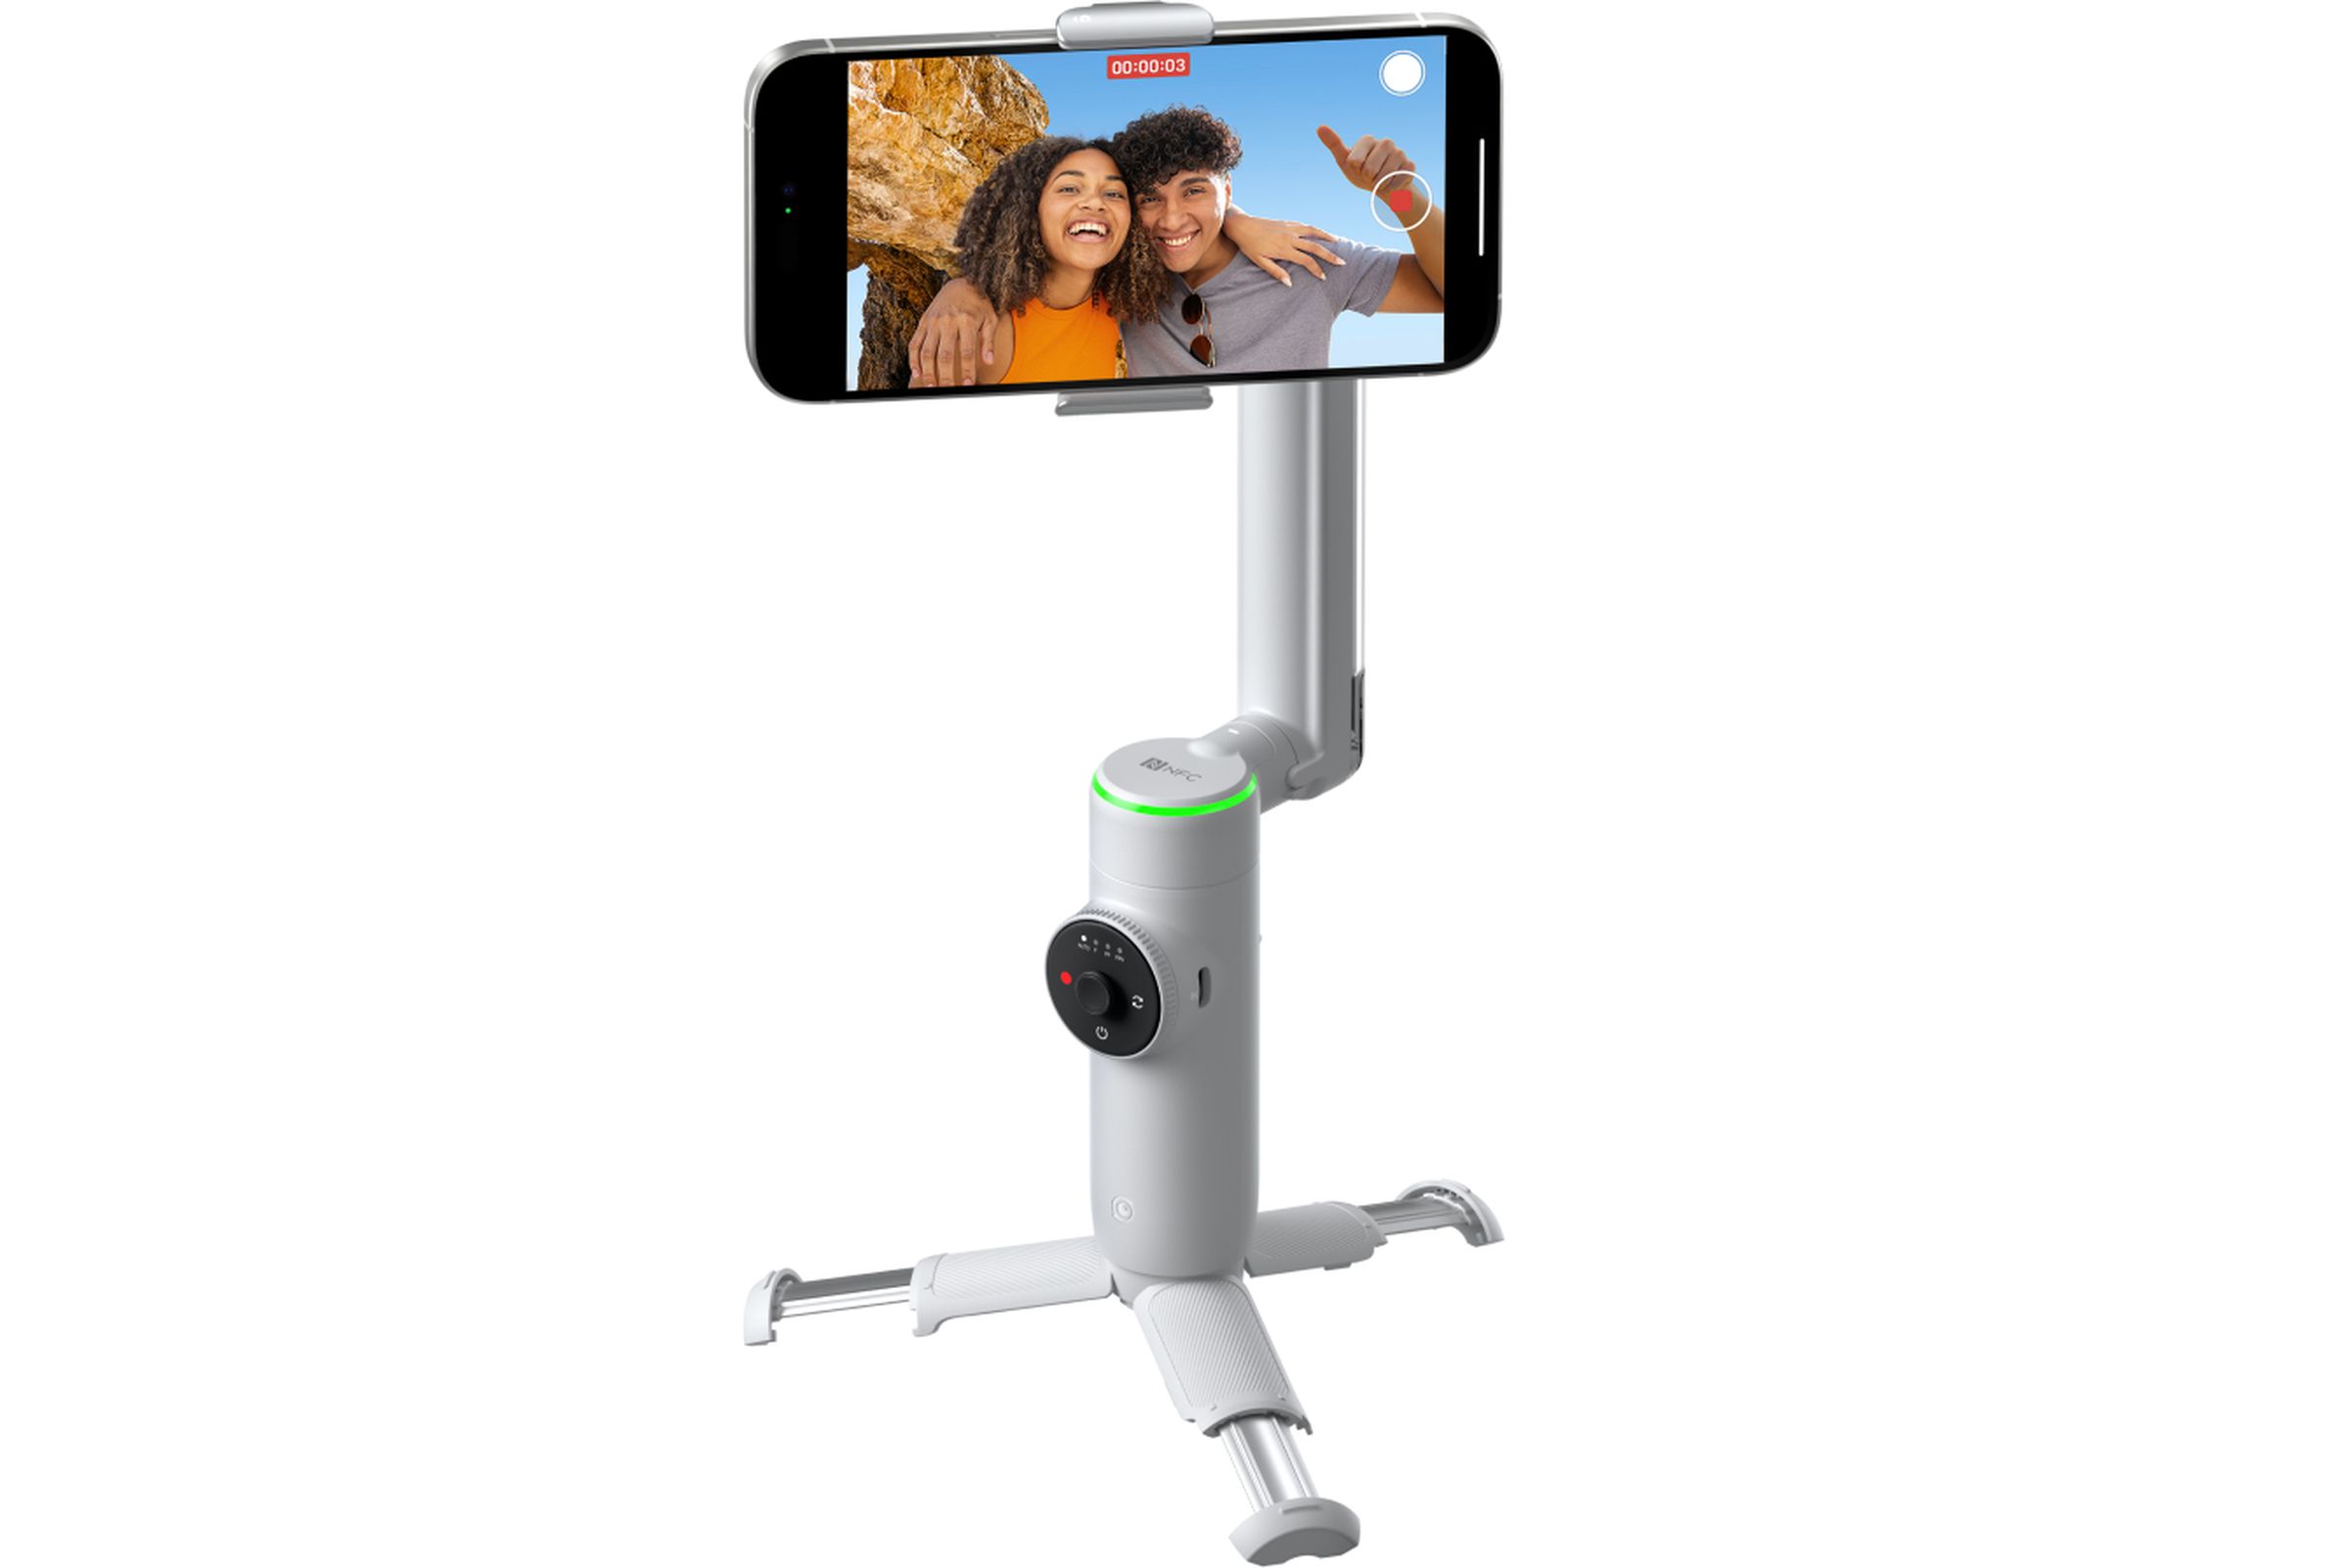 The Insta360 Flow Pro with its built-in tripod legs extended.